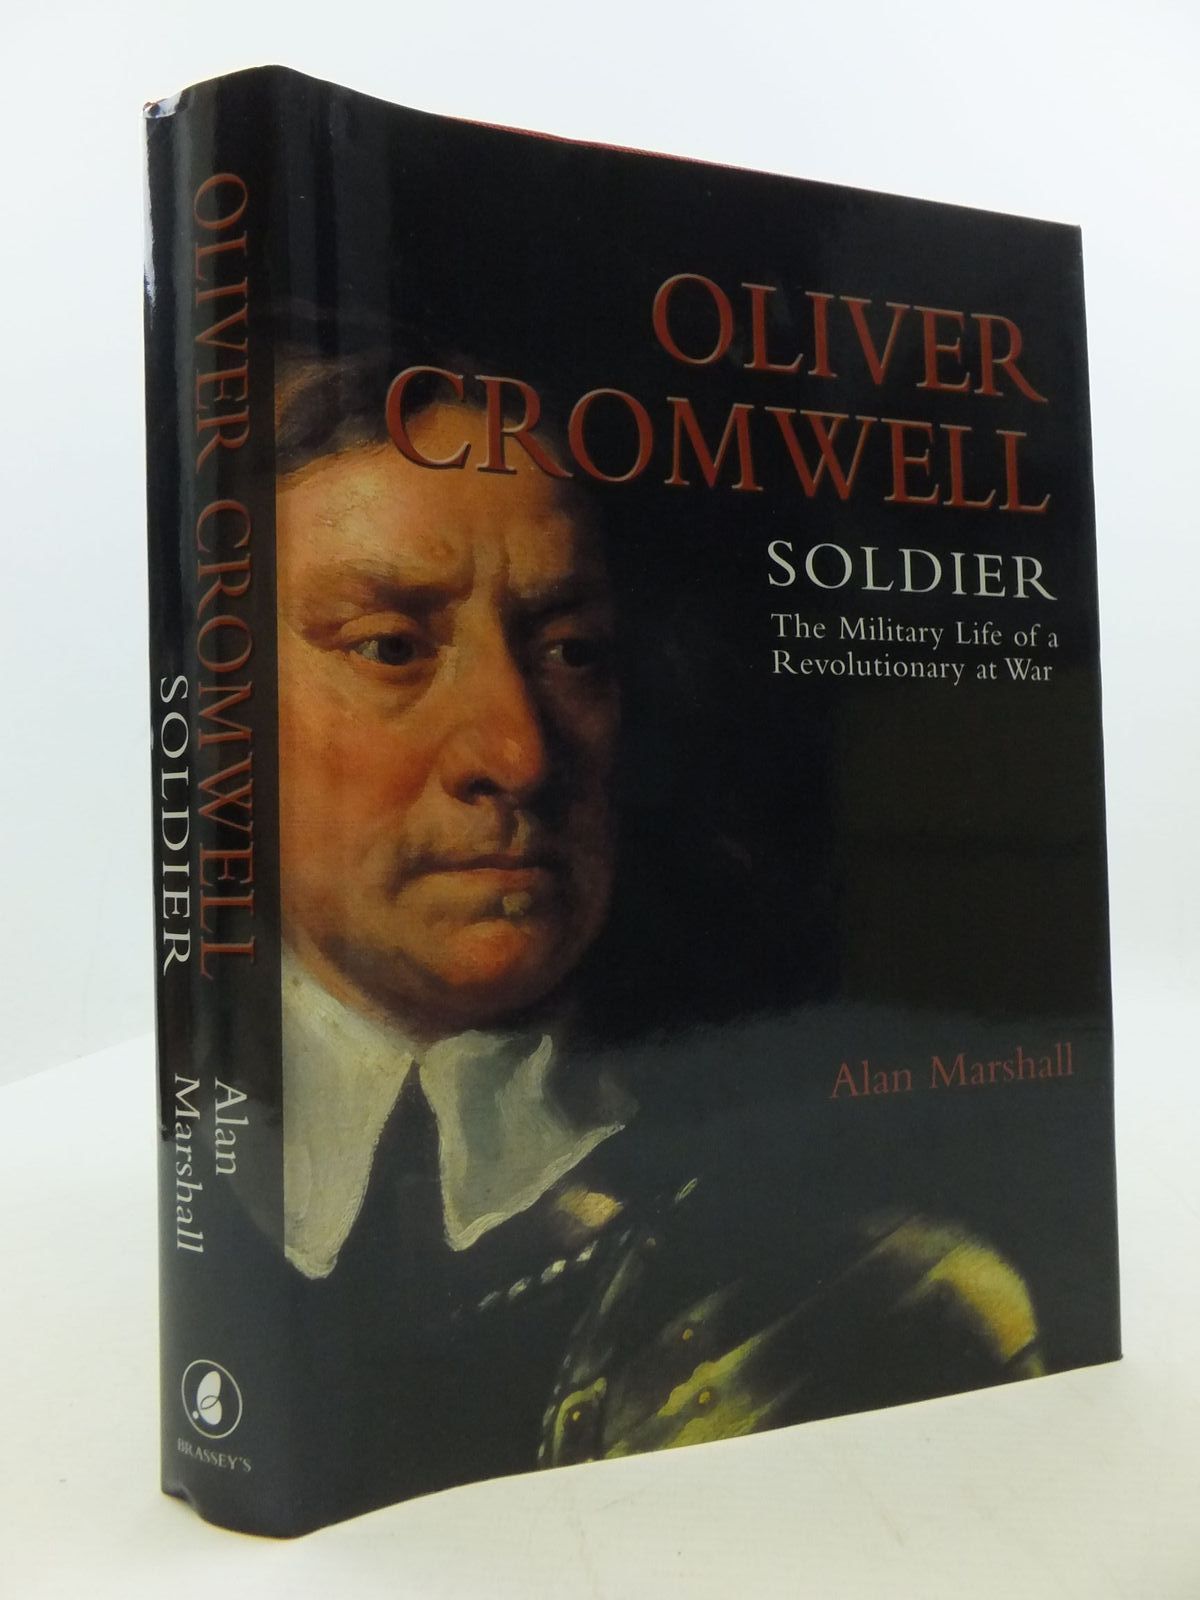 Photo of OLIVER CROMWELL SOLDIER written by Marshall, Alan published by Brassey's (STOCK CODE: 2110158)  for sale by Stella & Rose's Books